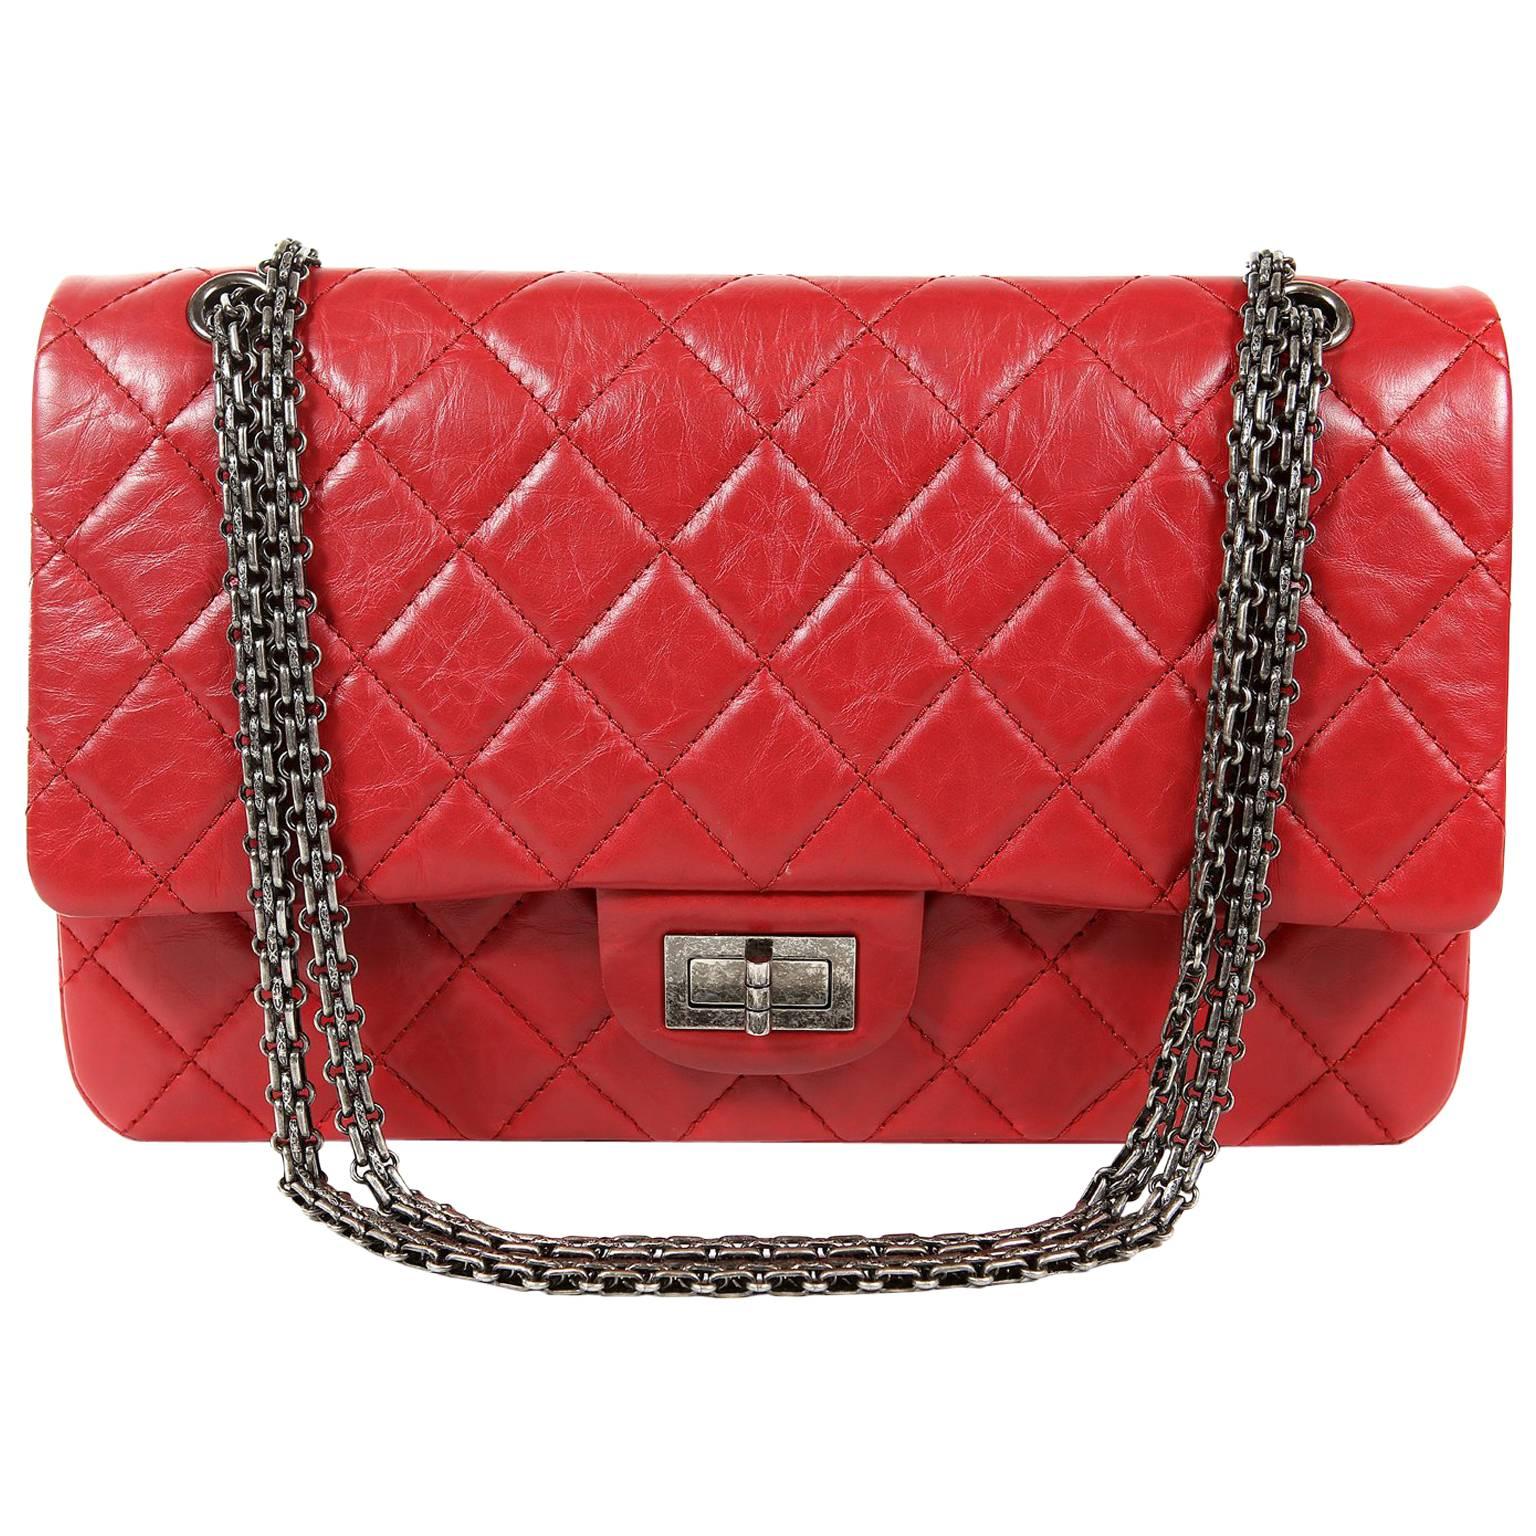 CHANEL Aged Calfskin Quilted Mobile Art 2.55 Reissue 227 Flap